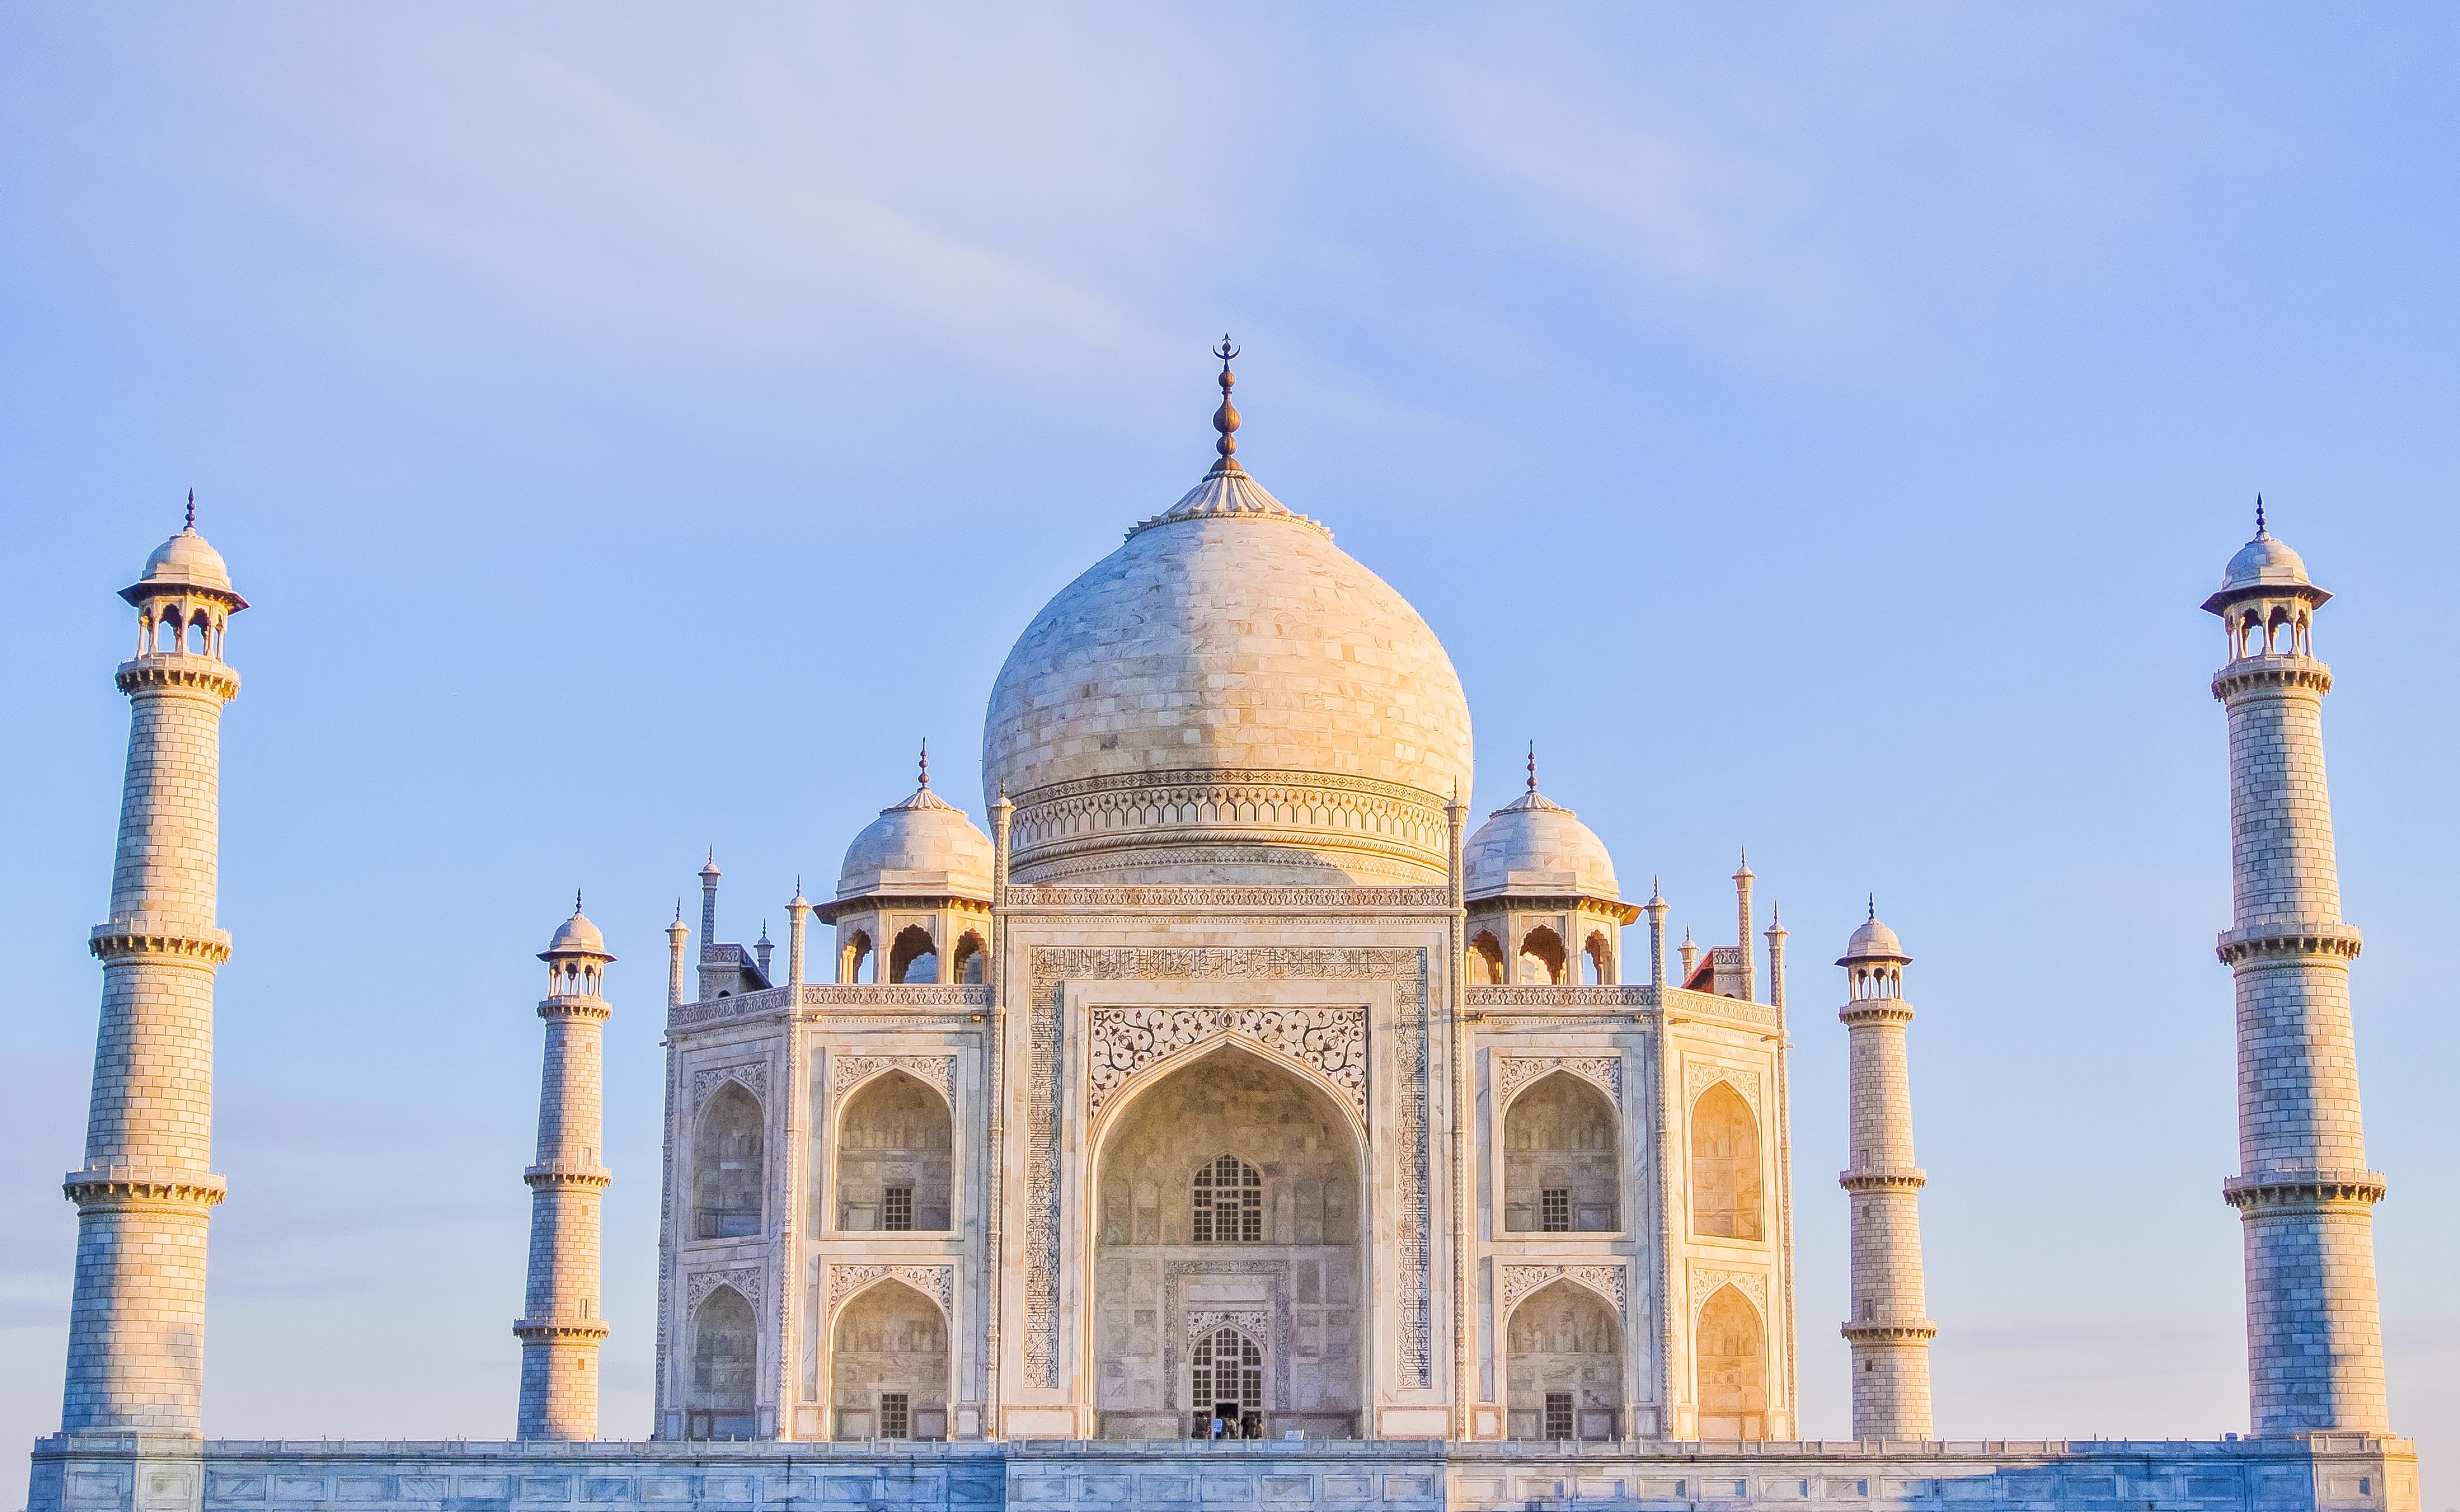 The Taj Mahal is another excellent example of Timurid architecture